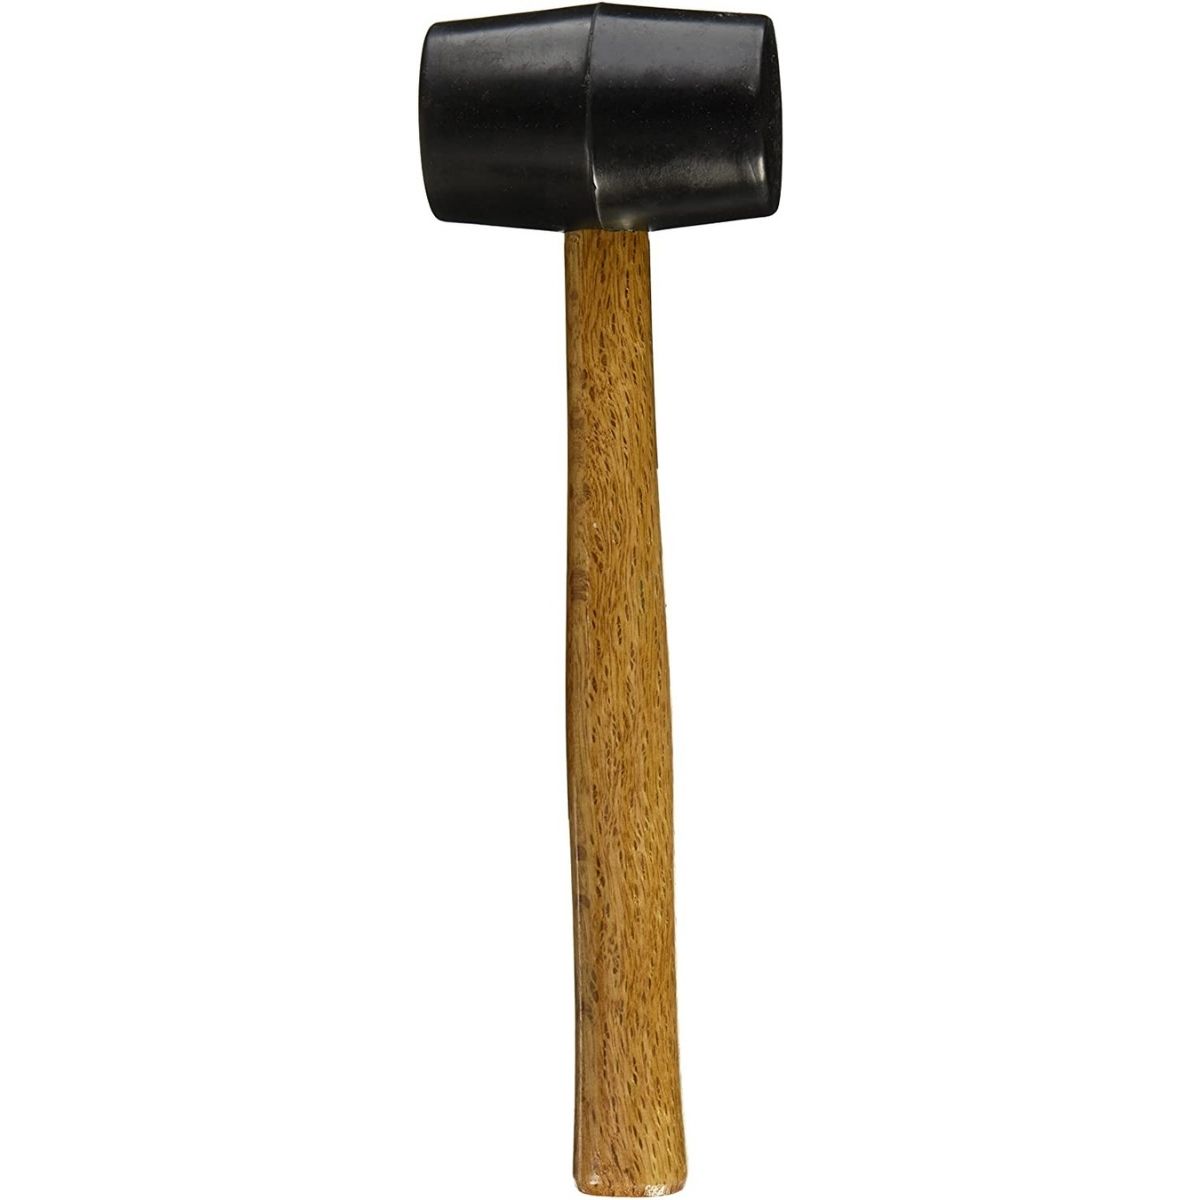 Stanley 16 Ounce Rubber Mallet